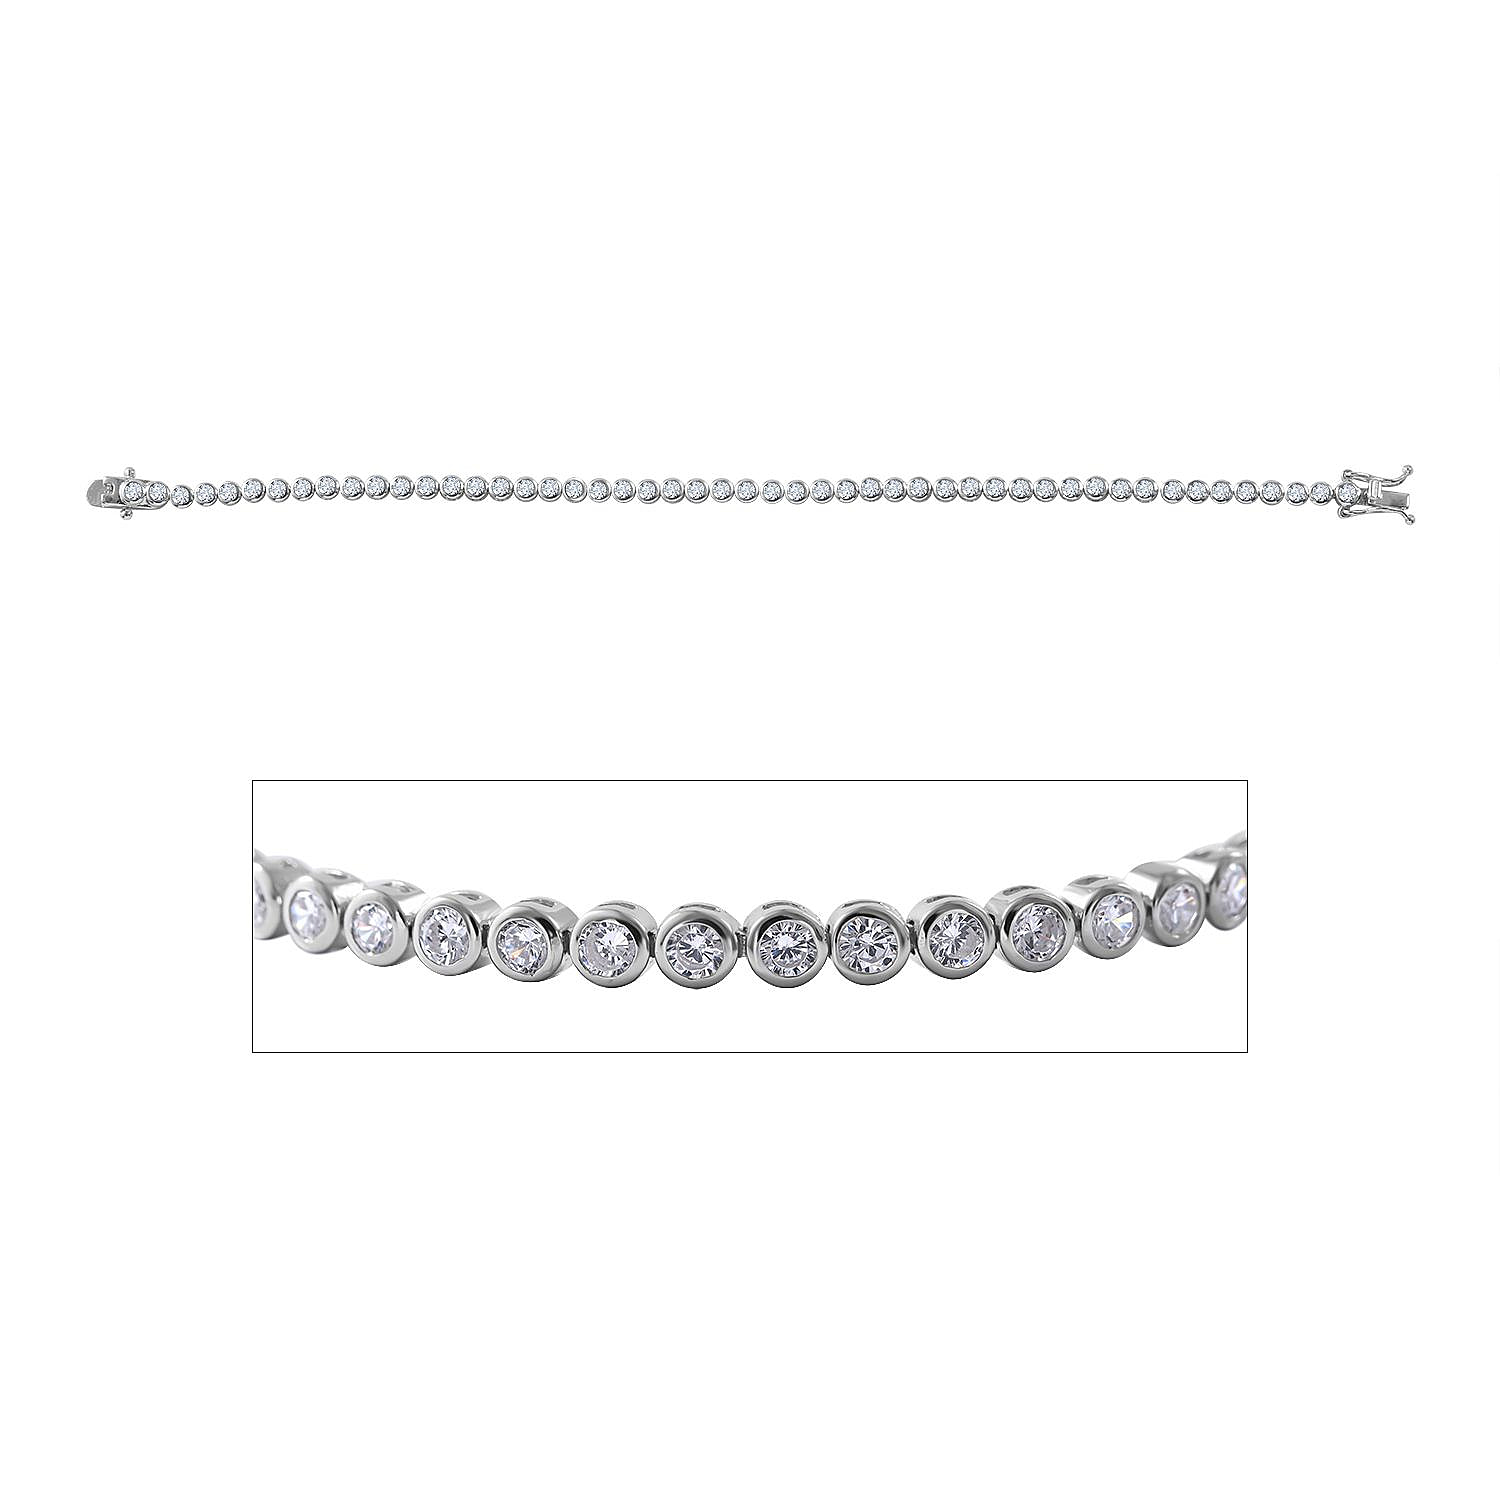 NY Closeout- Cubic Zirconia Bracelet (Size - 8) in Rhodium Overlay Sterling Silver 6.88 Ct, Silver Wt. 9.41 Gms